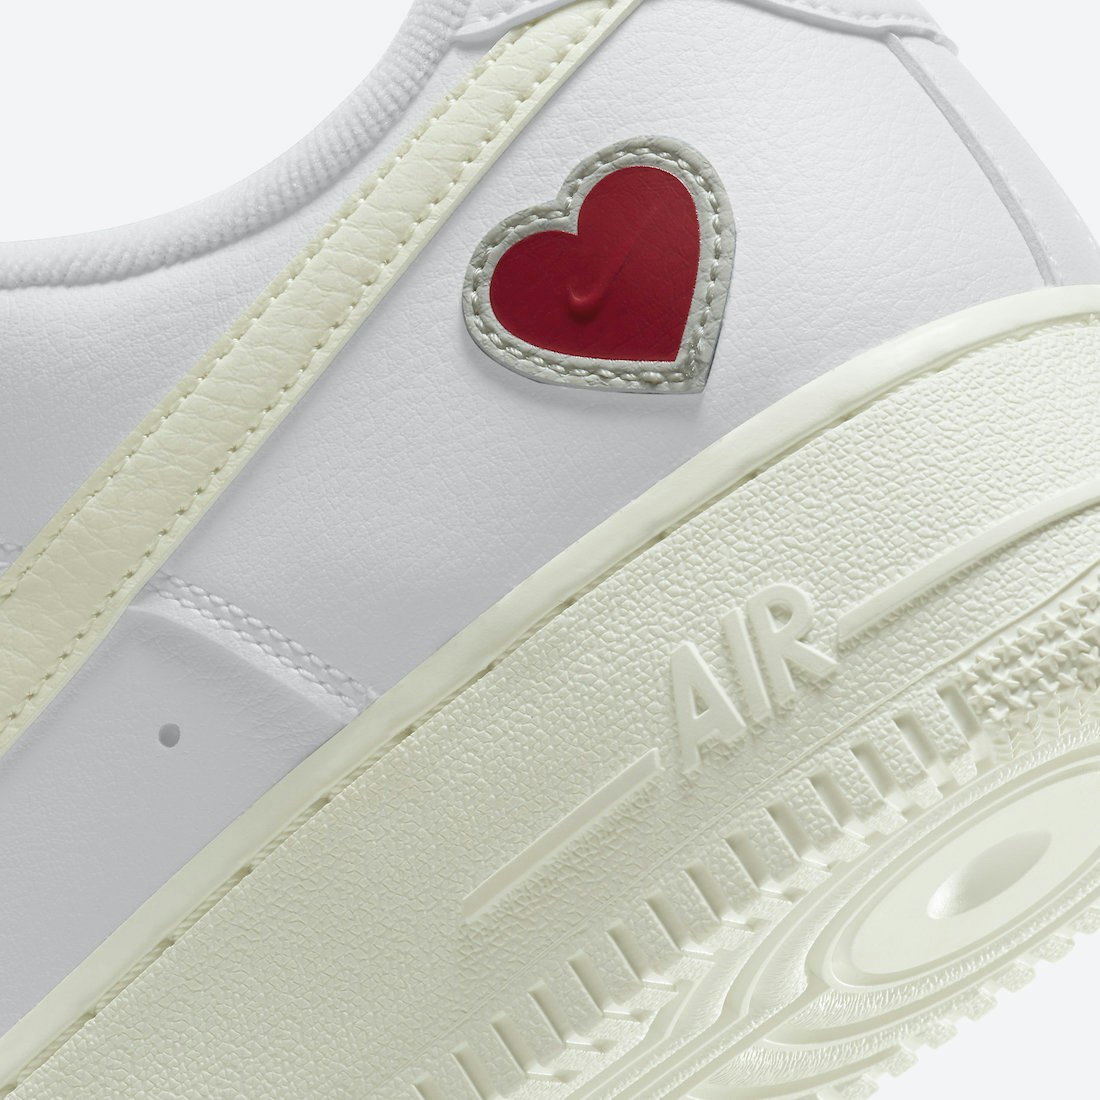 Nike Air Force 1 “Valentine’s Day”